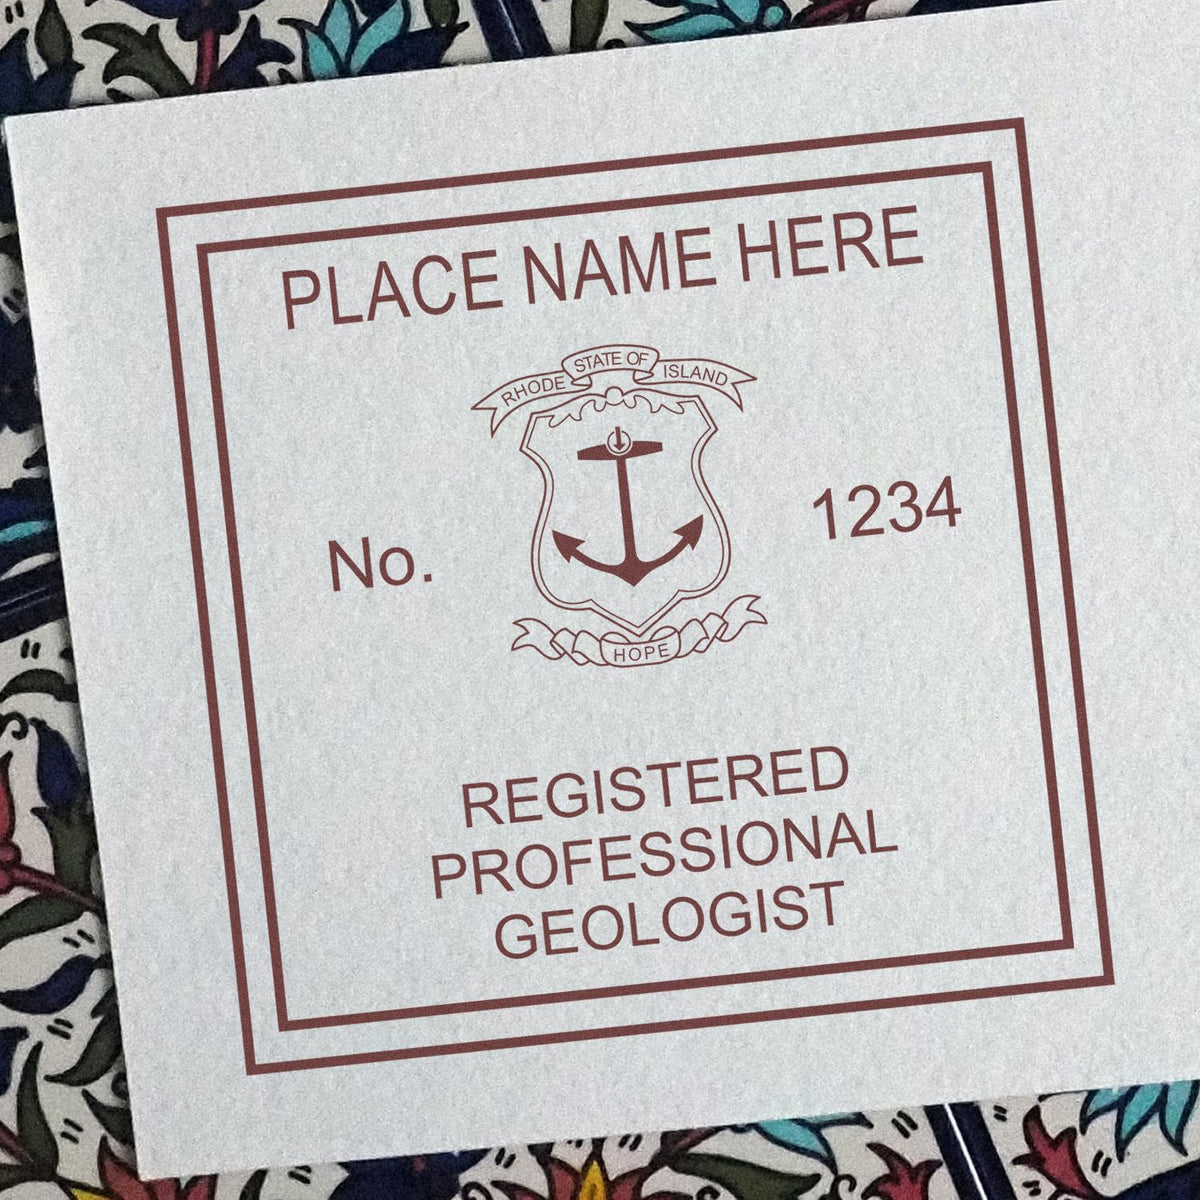 Another Example of a stamped impression of the Rhode Island Professional Geologist Seal Stamp on a office form